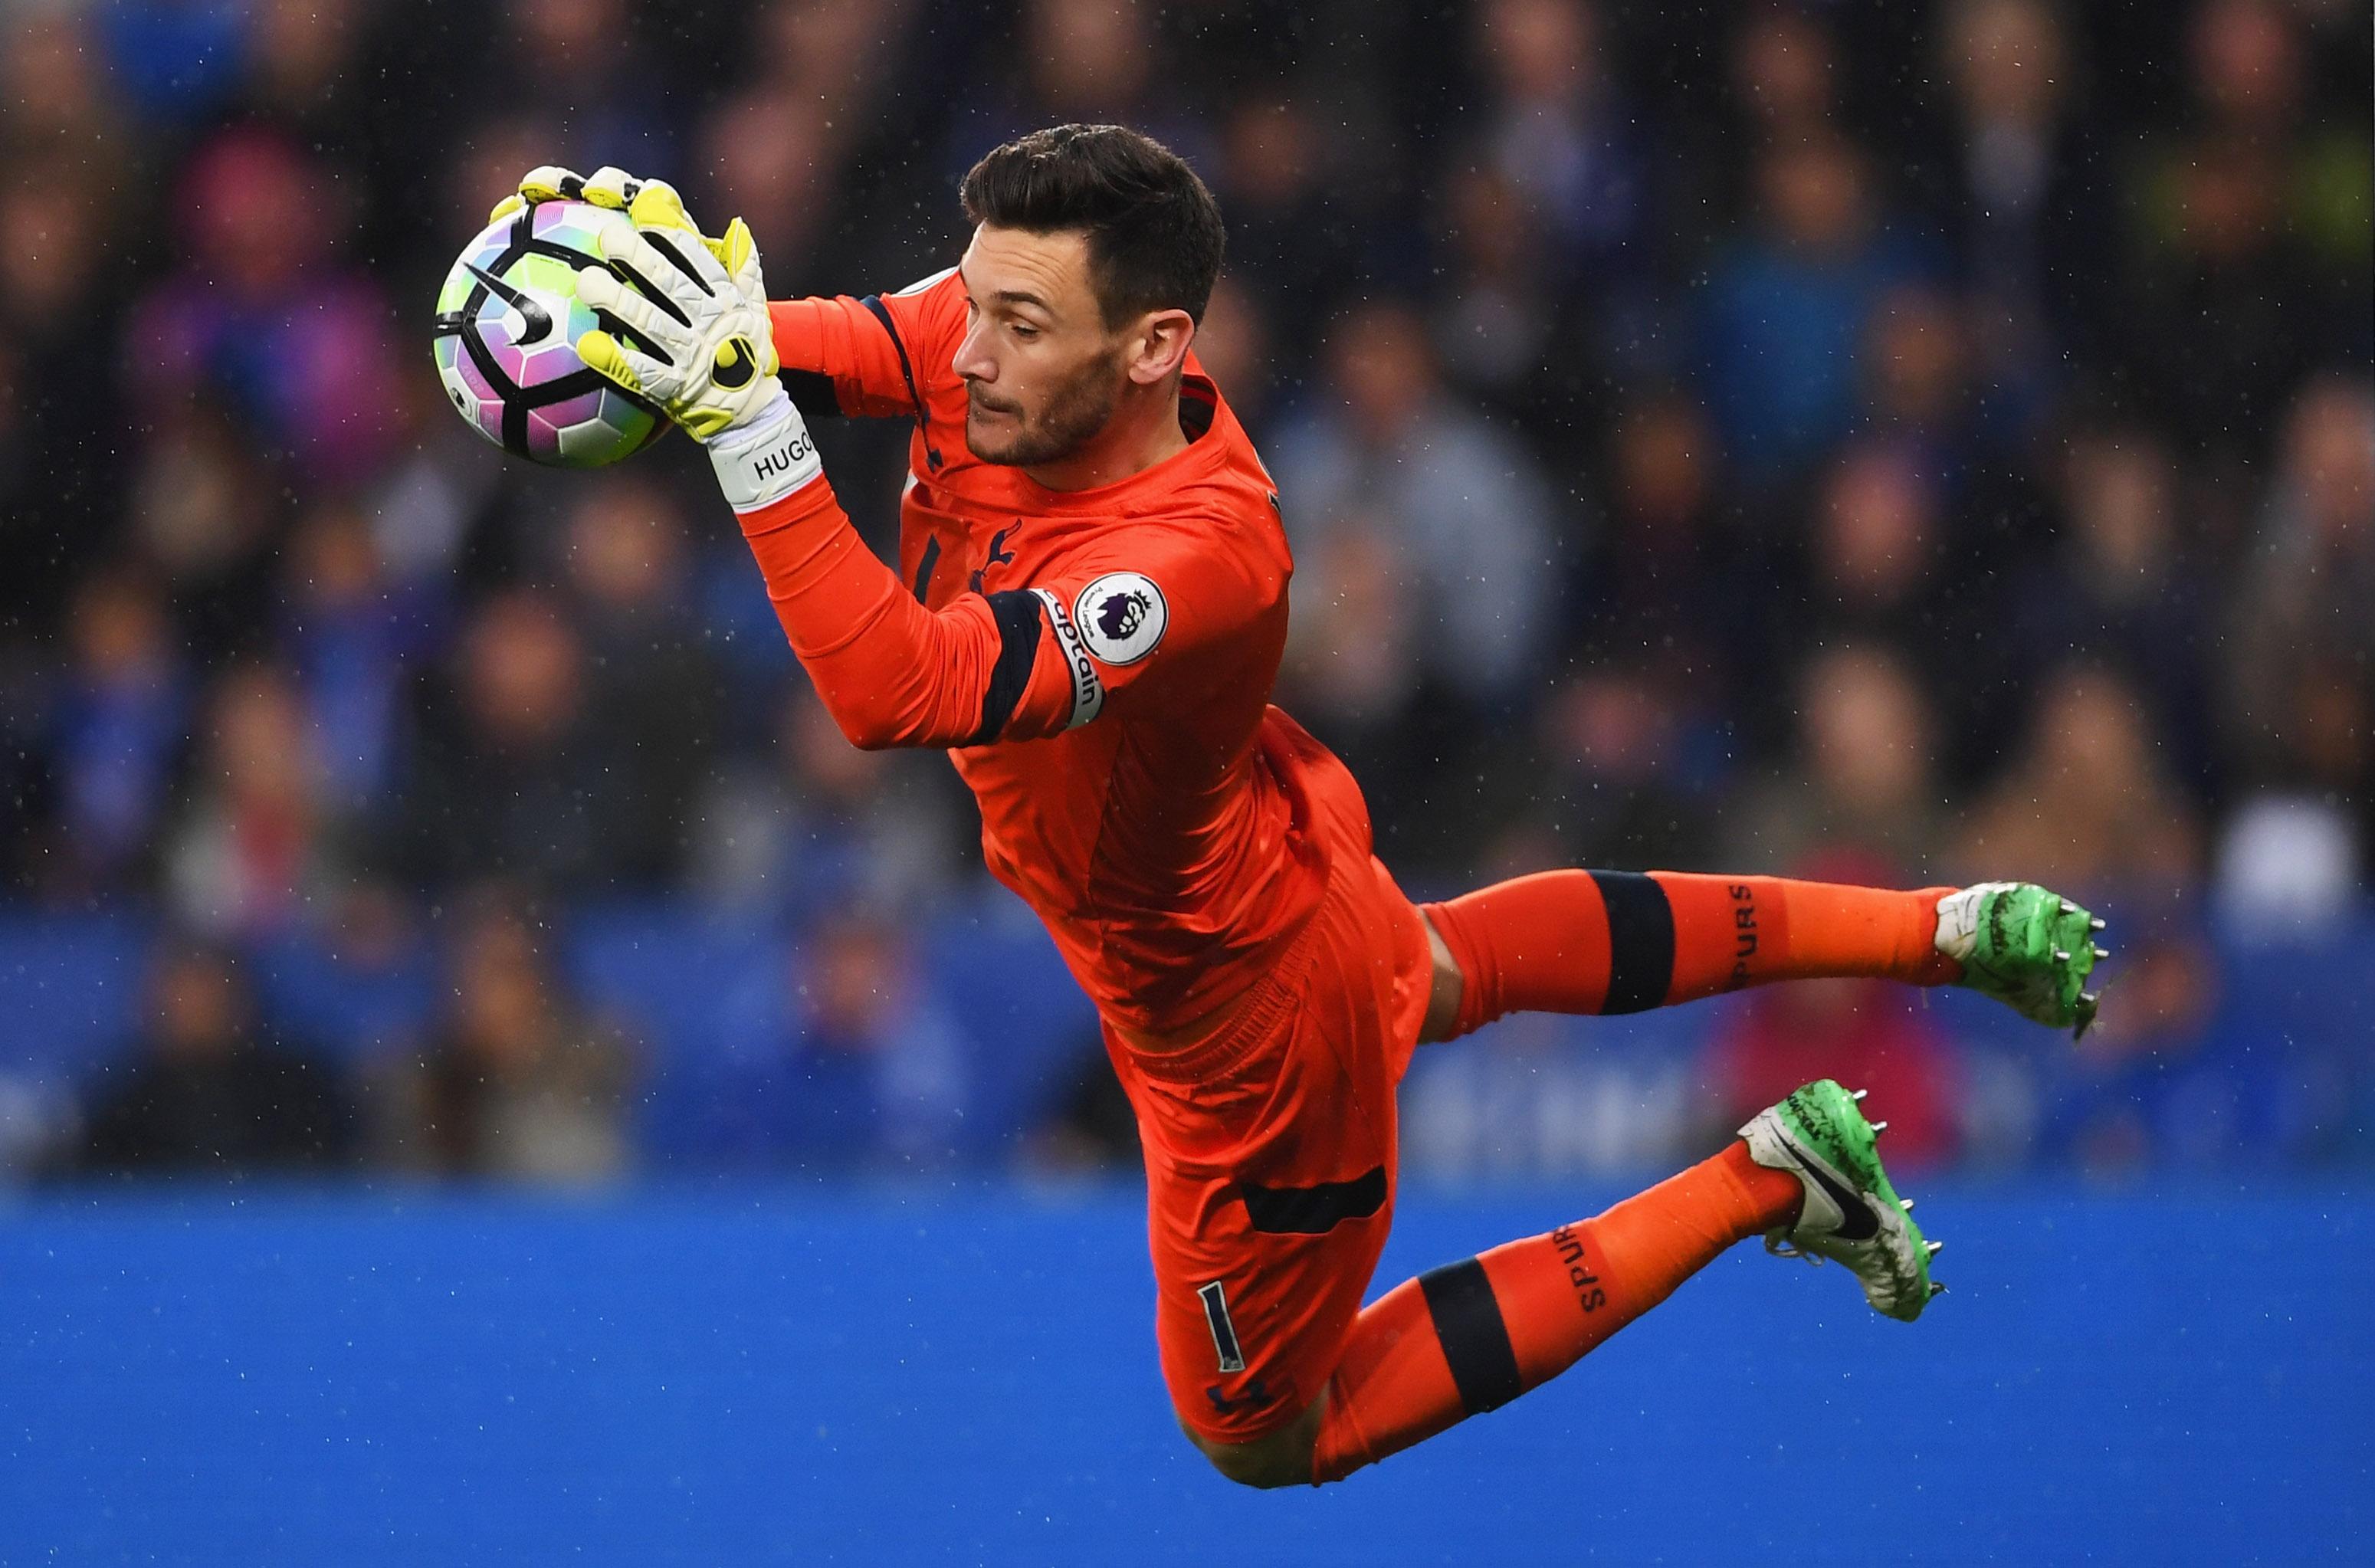 Spectacular Hugo Lloris had another strong campaign for Tottenham